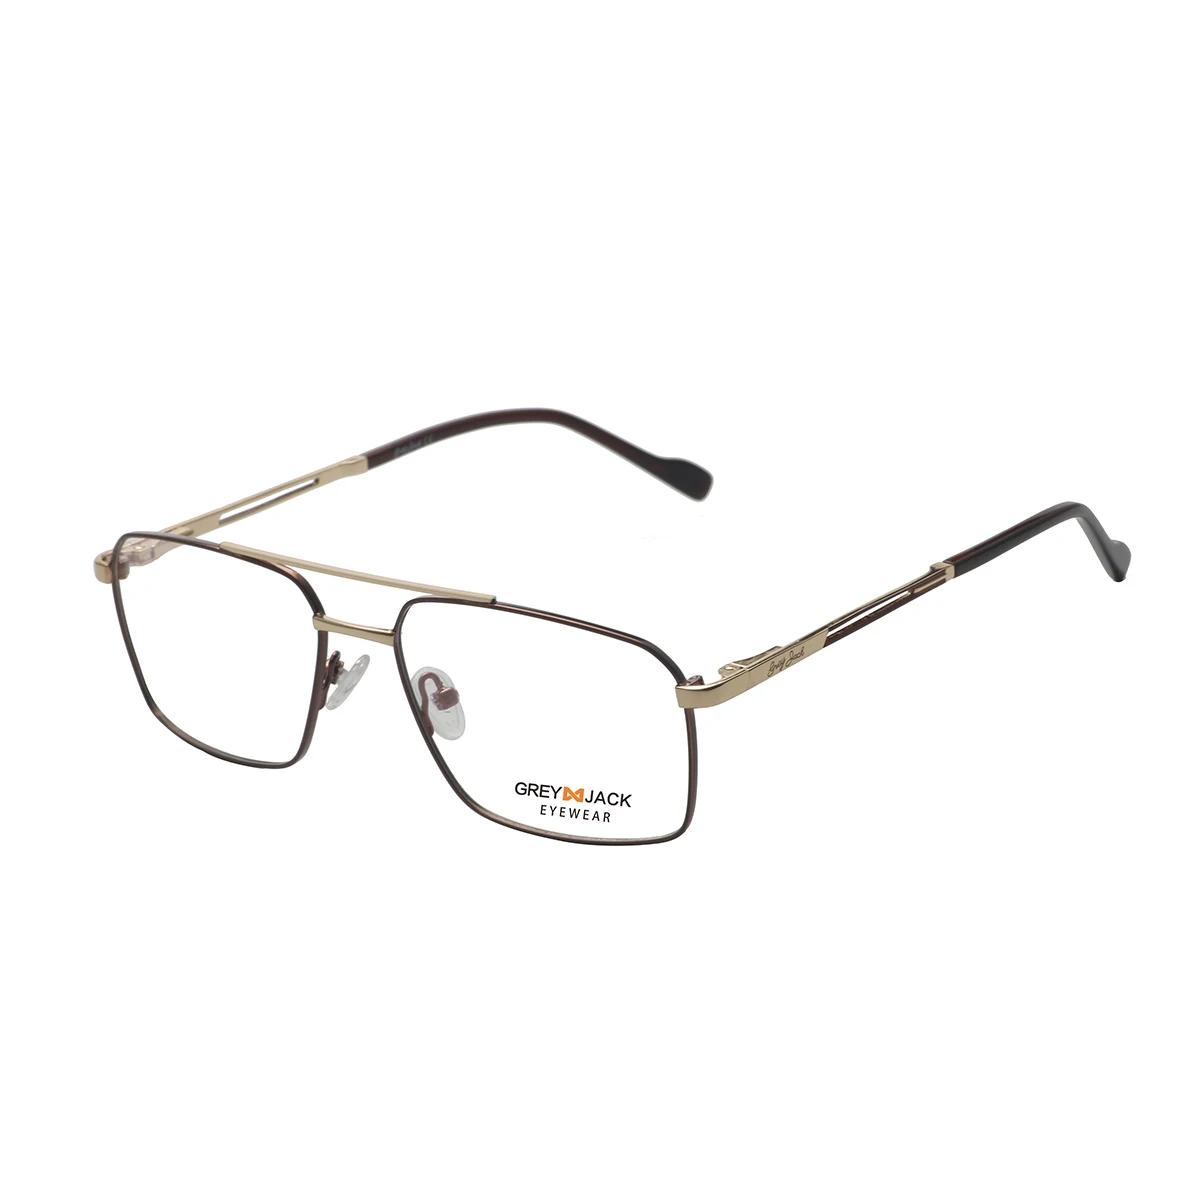 

Hot Sell Fashion High Quality Eyewear Metal Square Frame Eyeglasses Business Optical spectacle Frames In Stock, Photos shown